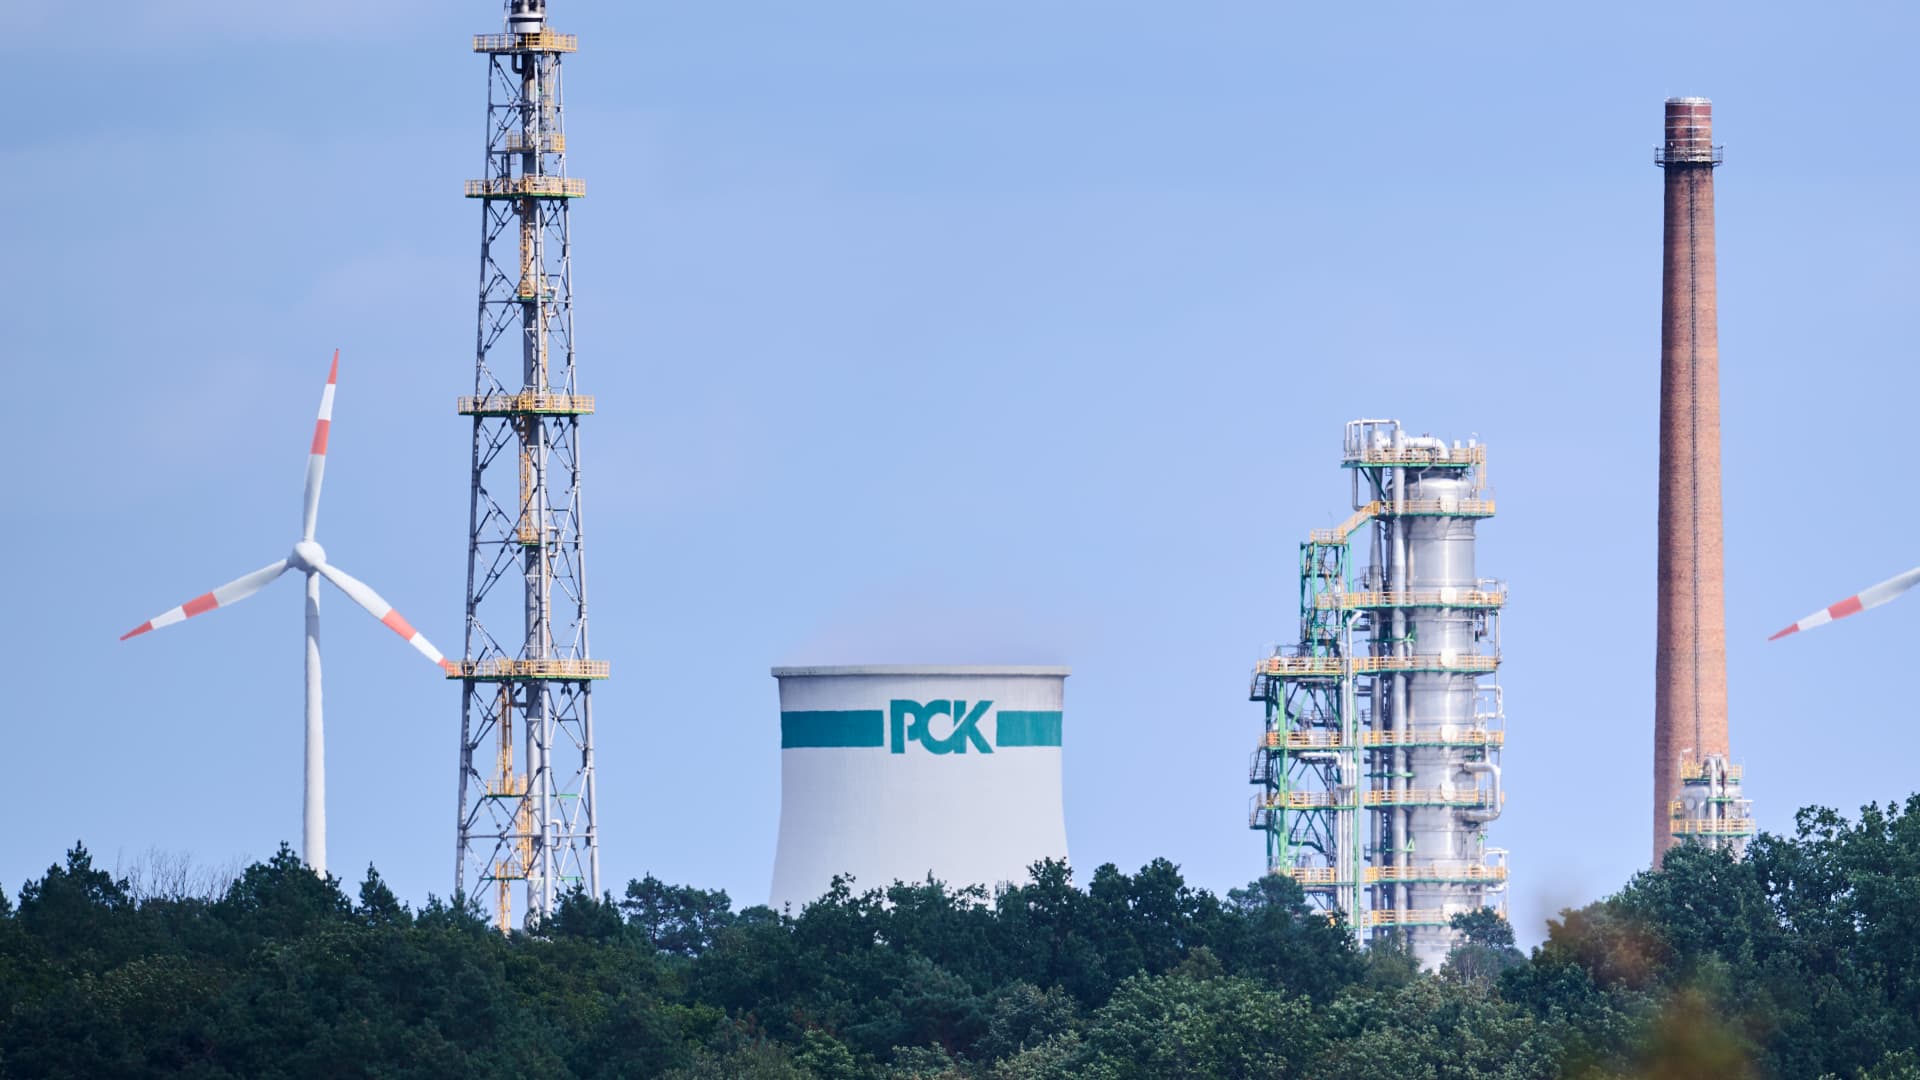 Polish firm PCK wants Rosneft’s old stake in Schwedt refinery: Reuters